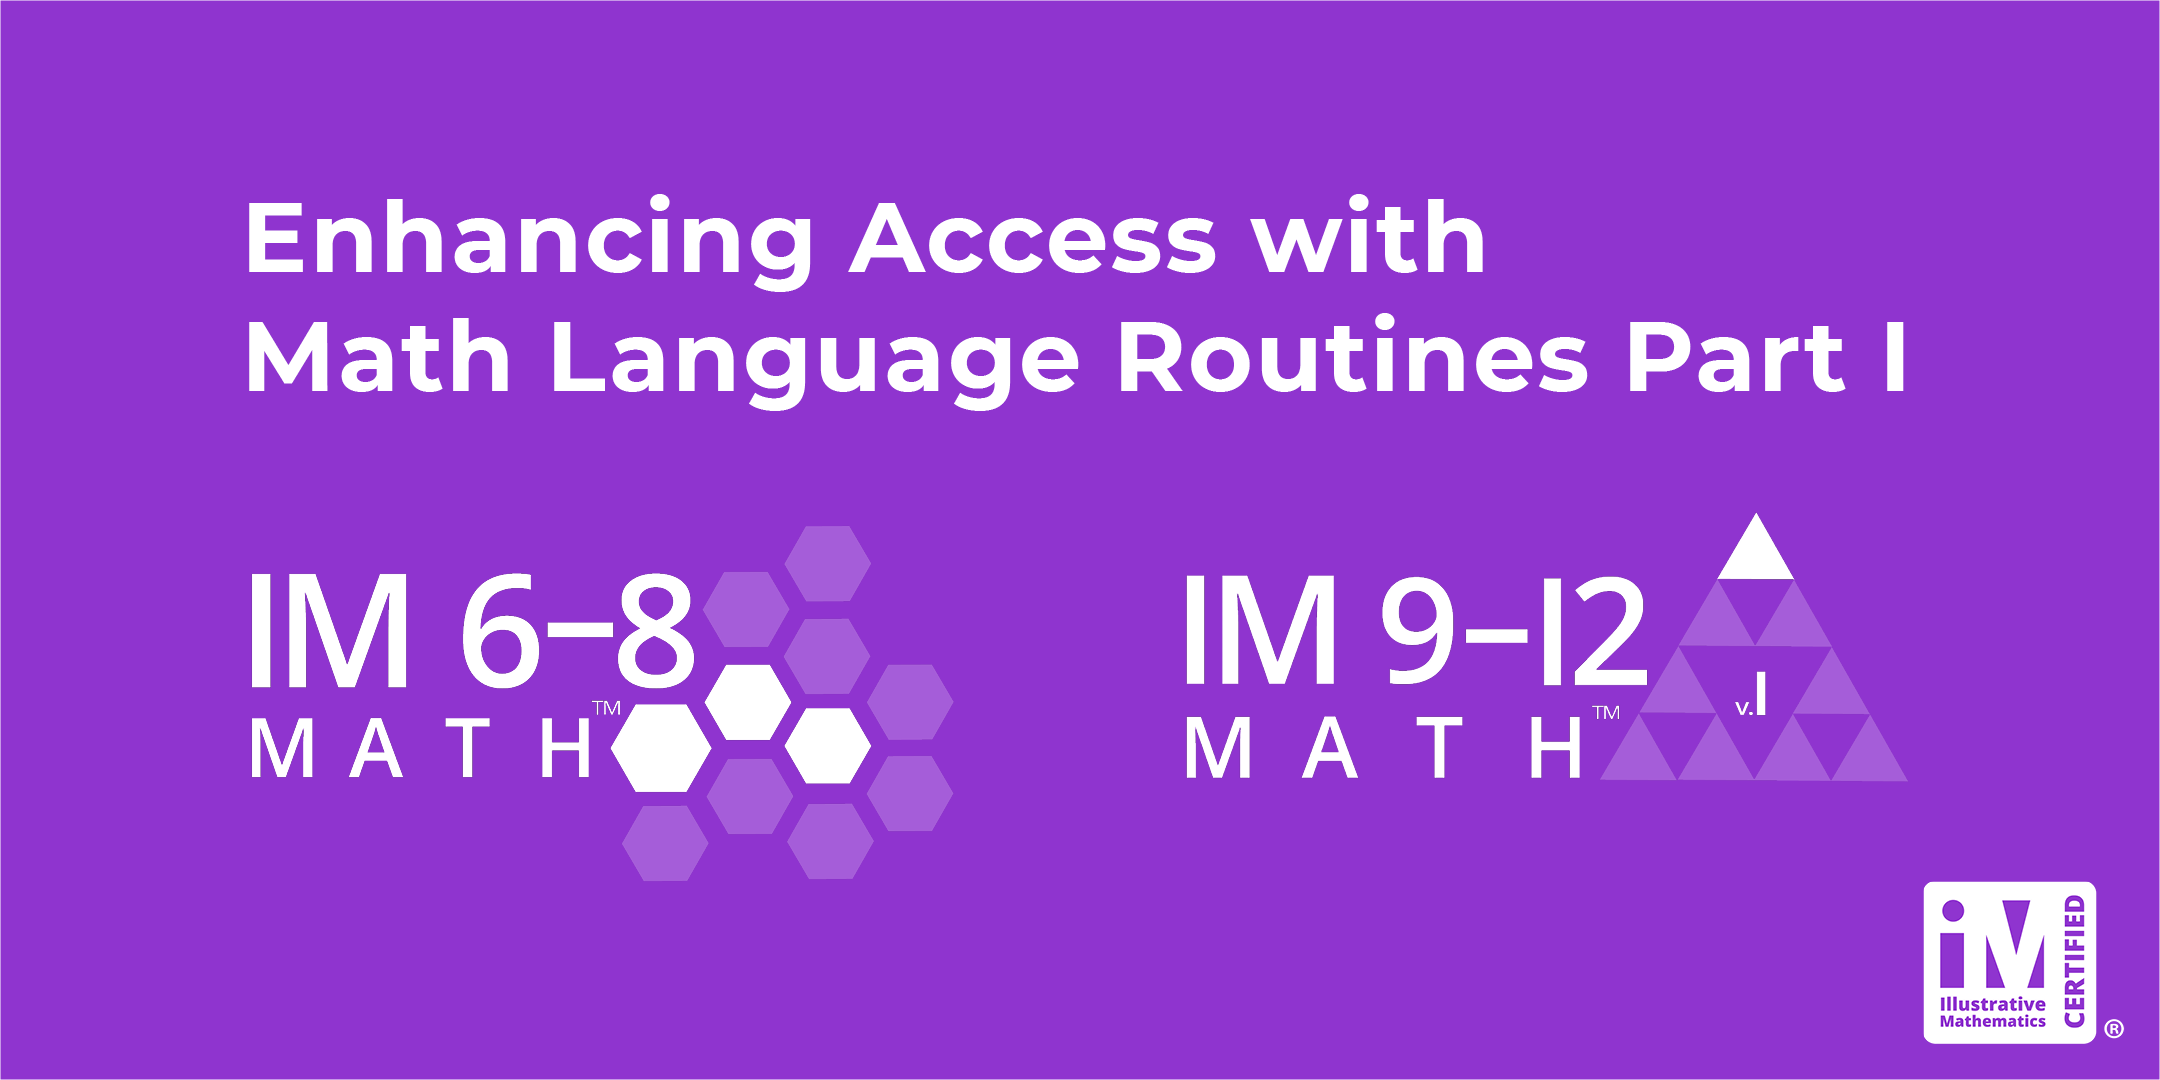 IM 6-12 Math: Enhancing Access with Math Language Routines Part 1